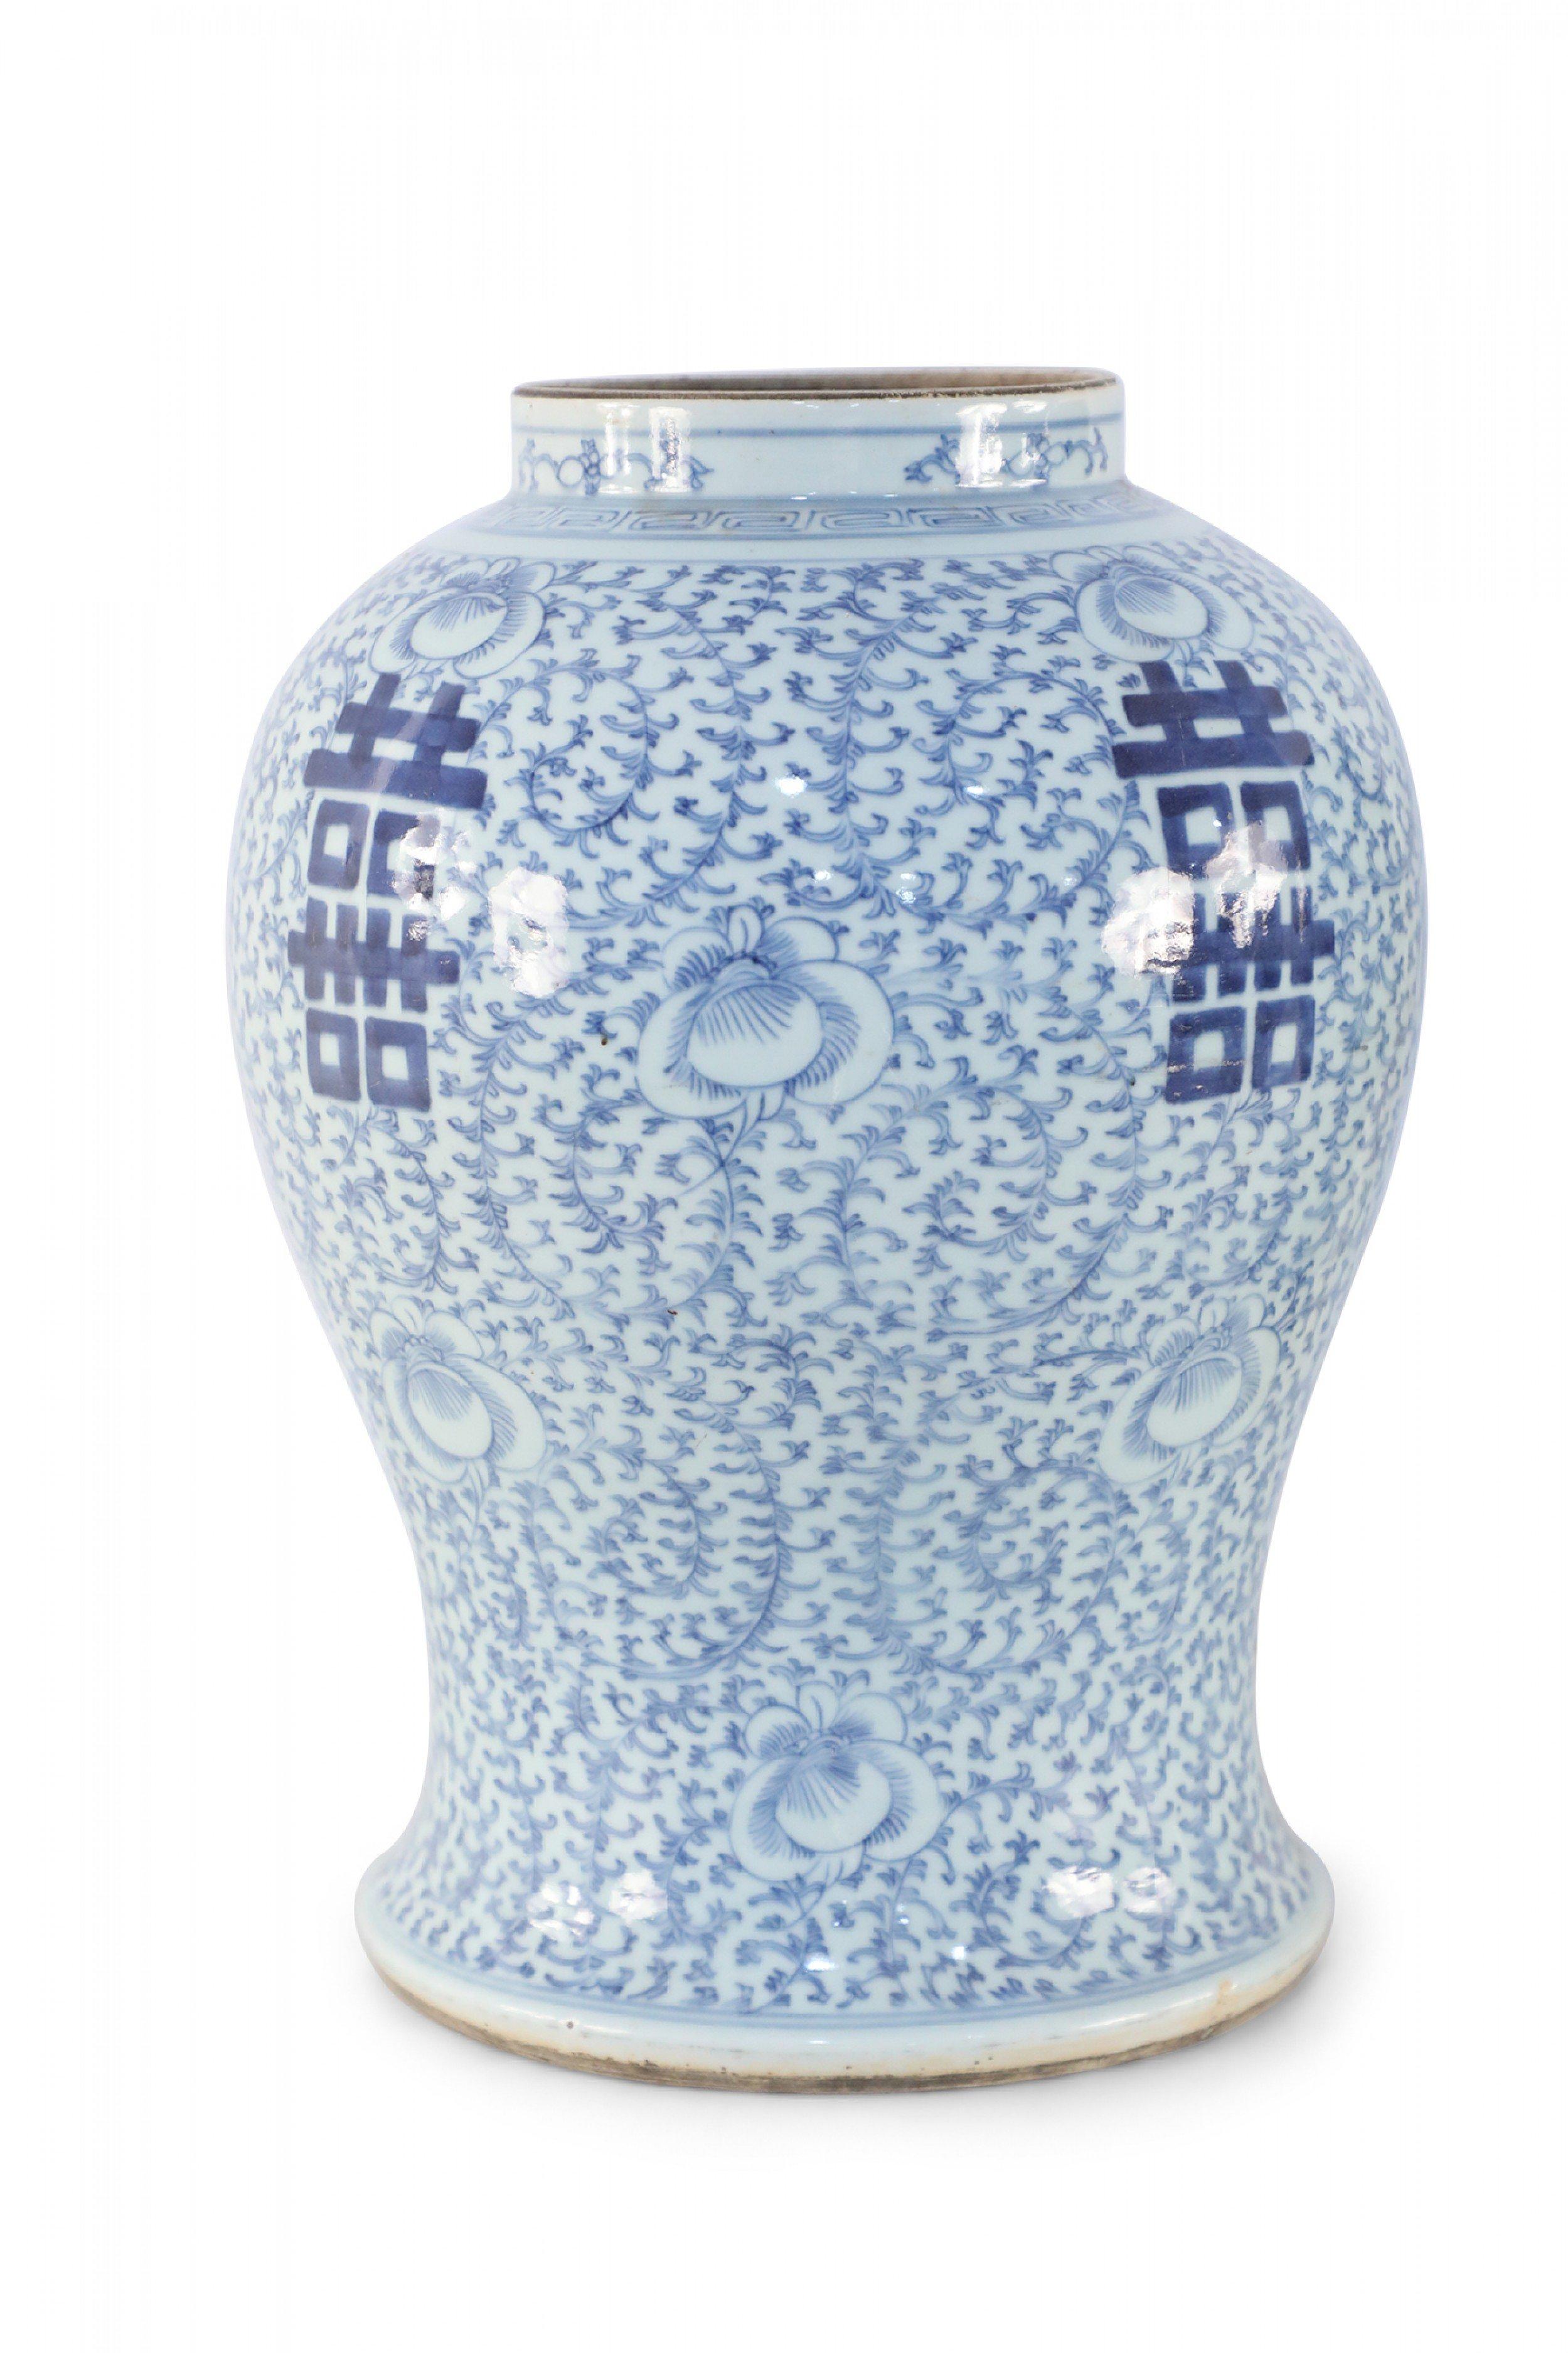 Chinese Off-White and Light Blue Vine Motif Porcelain Urn Vase In Good Condition For Sale In New York, NY